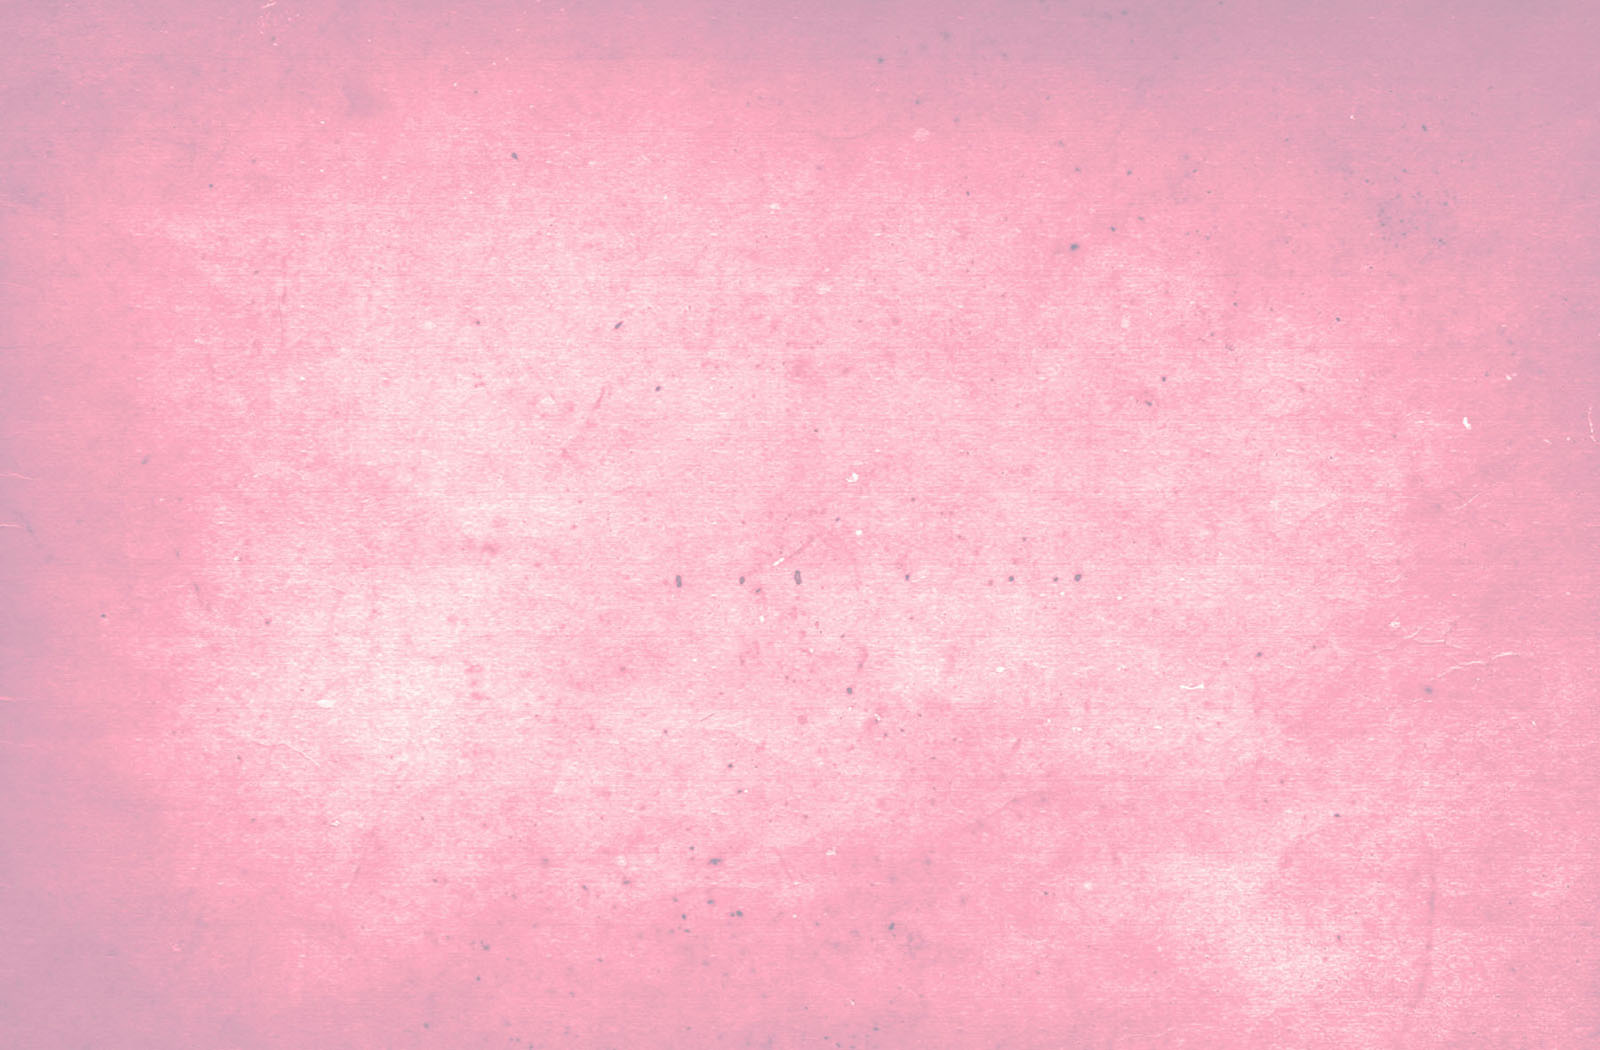 Black Dots Small Circles Unique Background Baby Pink